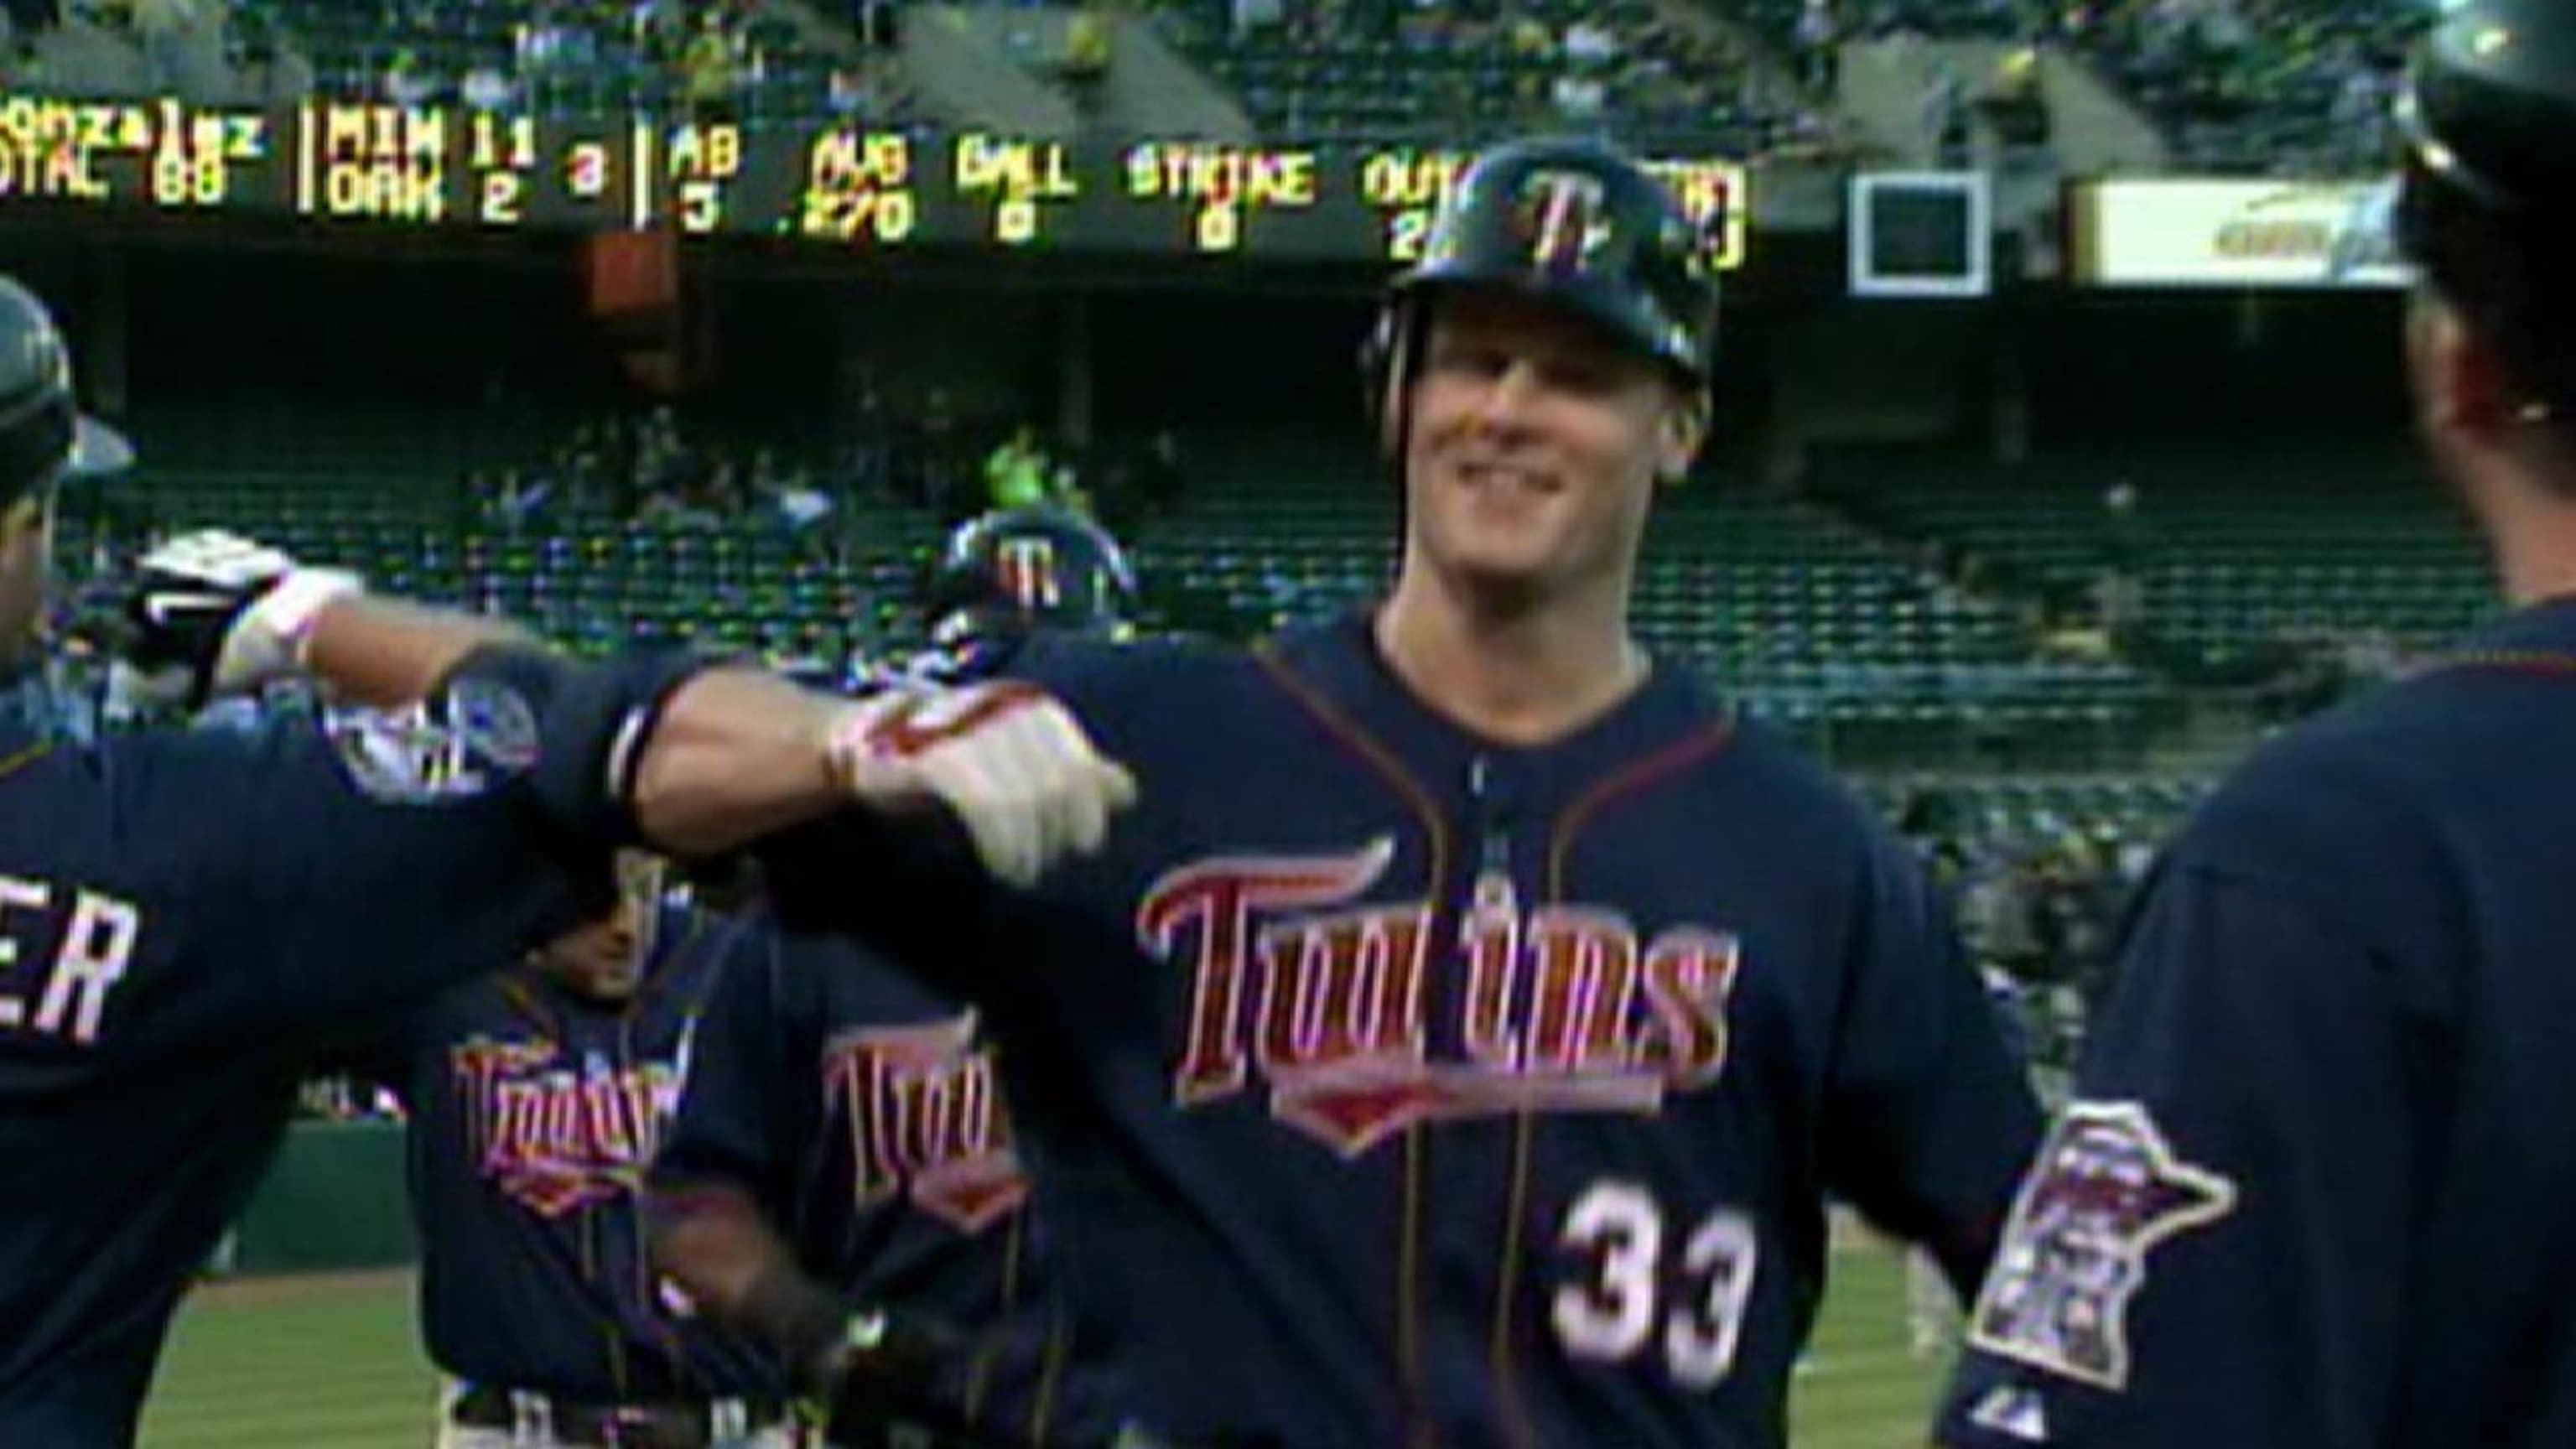 Justin Morneau was a Twins star 10 years ago when a slide changed everything